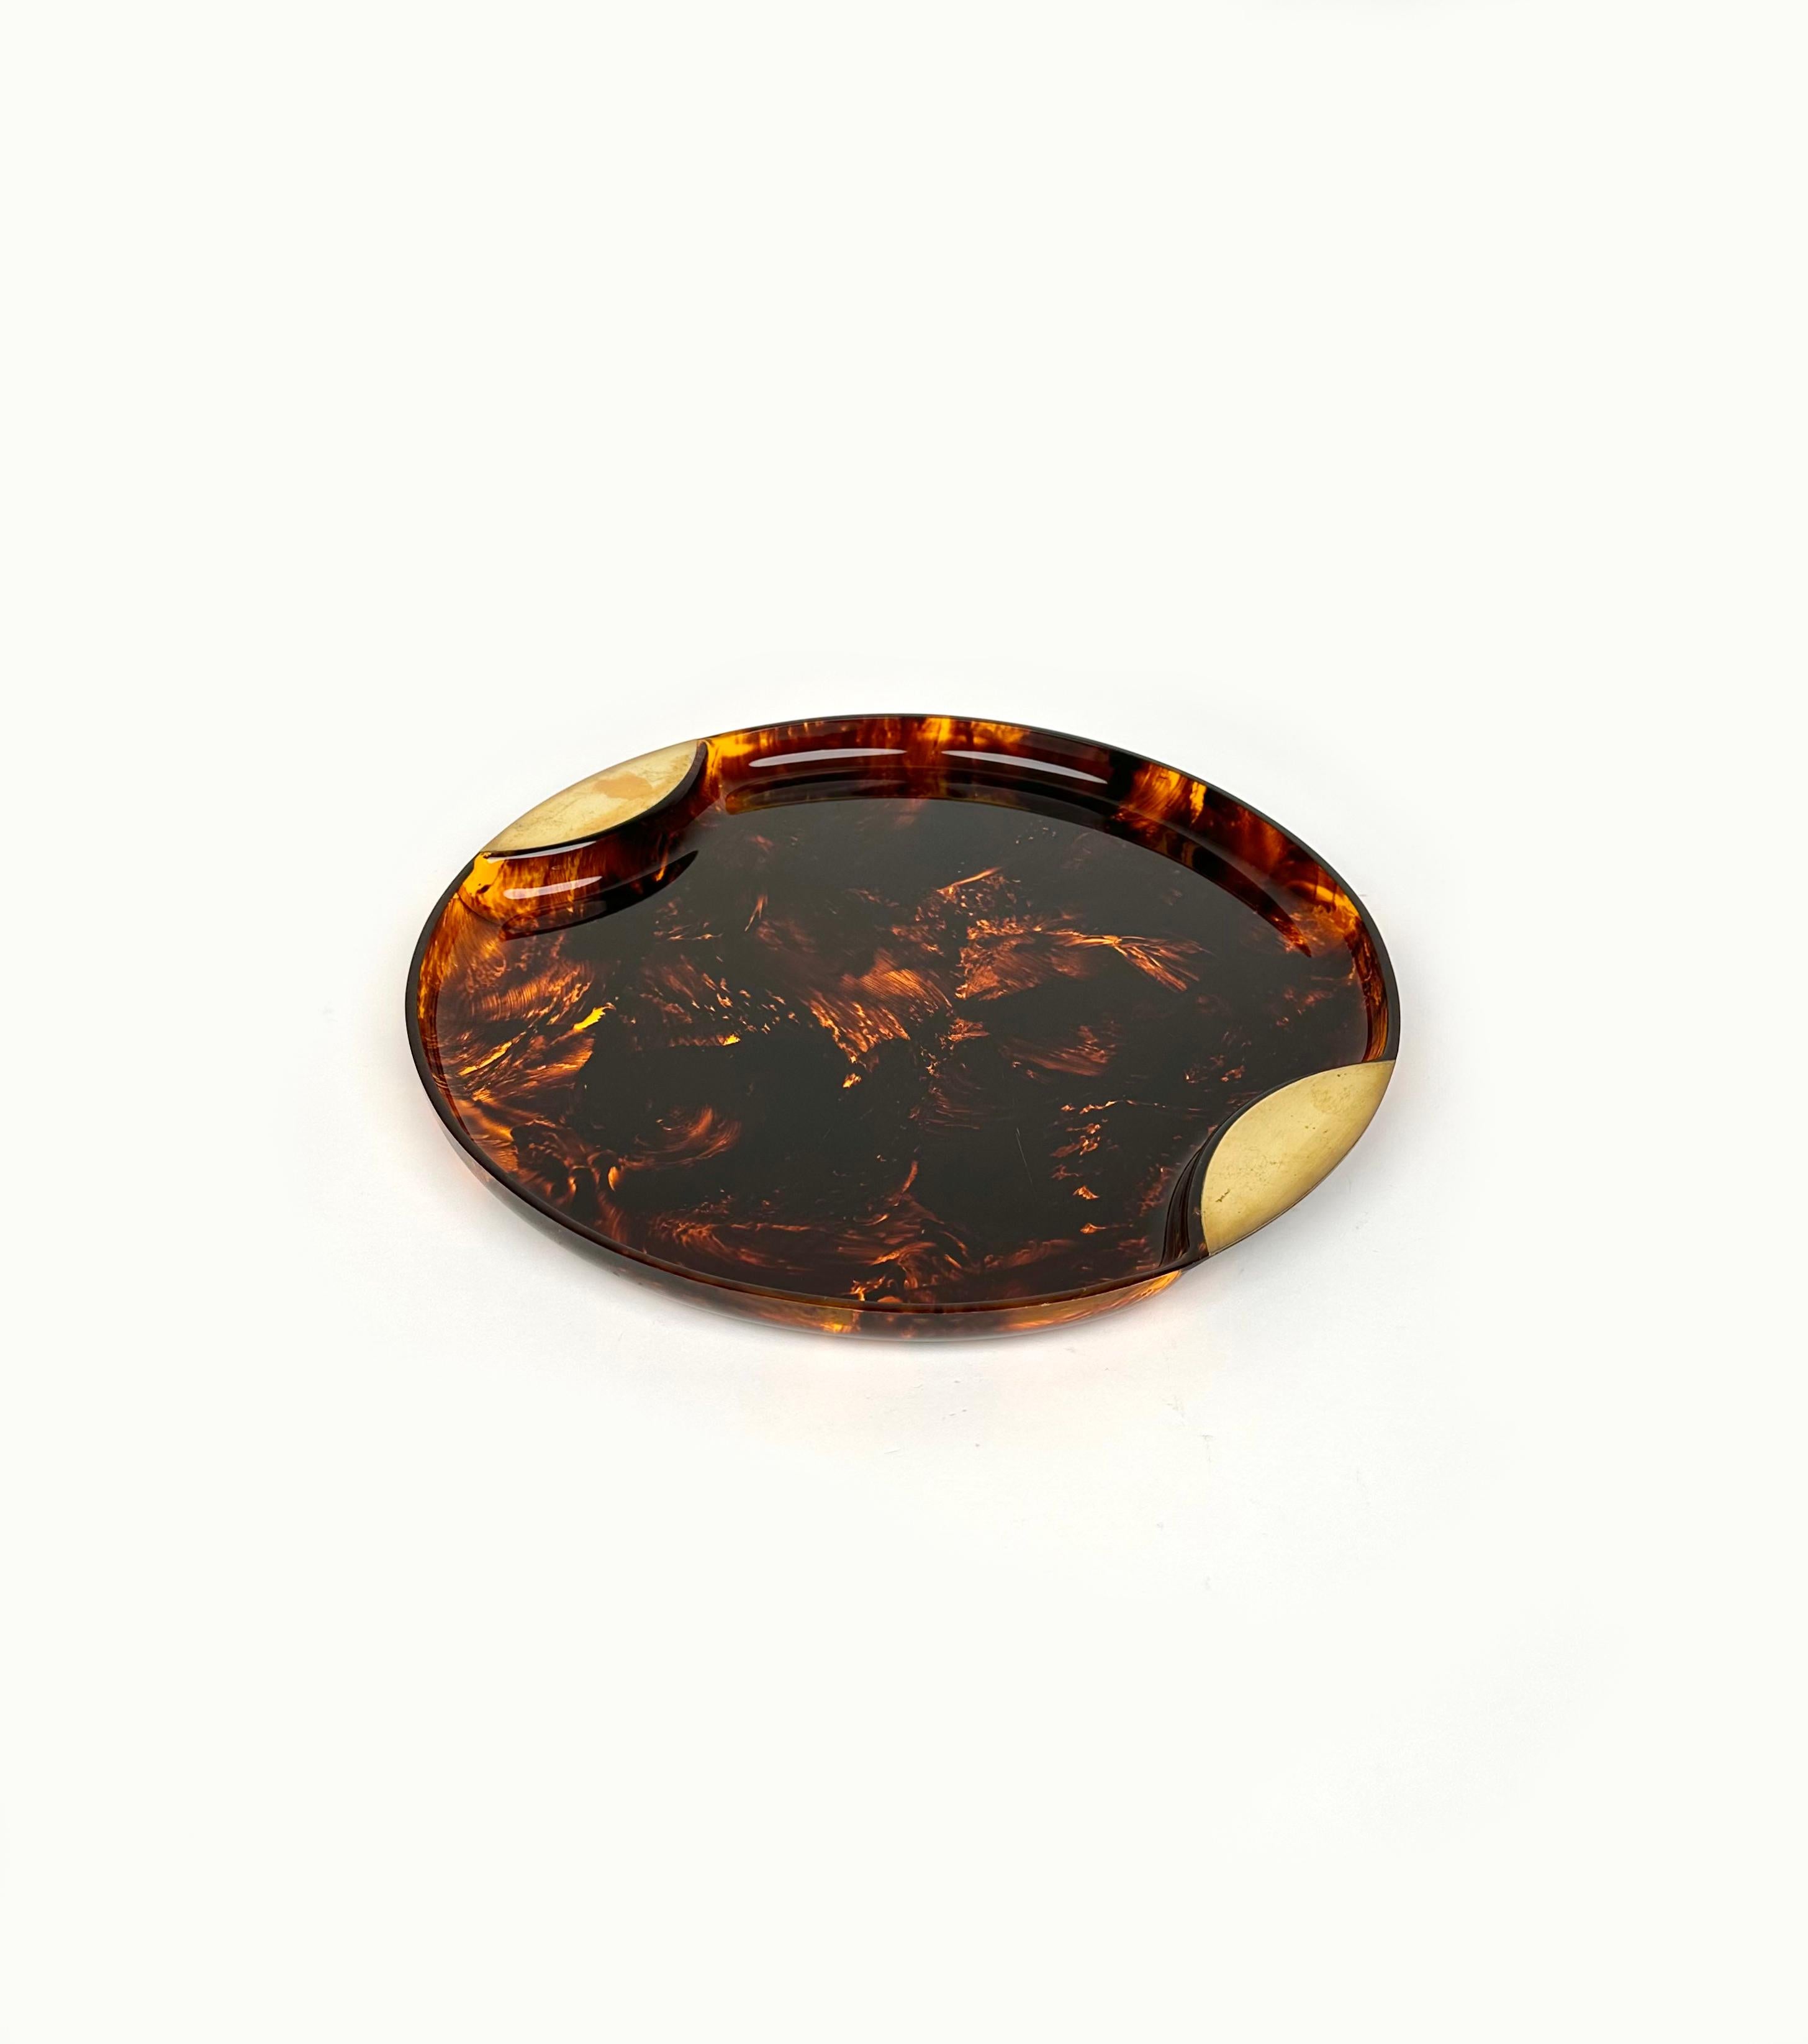 Amazing round serving tray or centerpiece in lucite faux tortoiseshell effect and brass handles, attributed to Guzzini. 

Made in Italy in the 1970s.